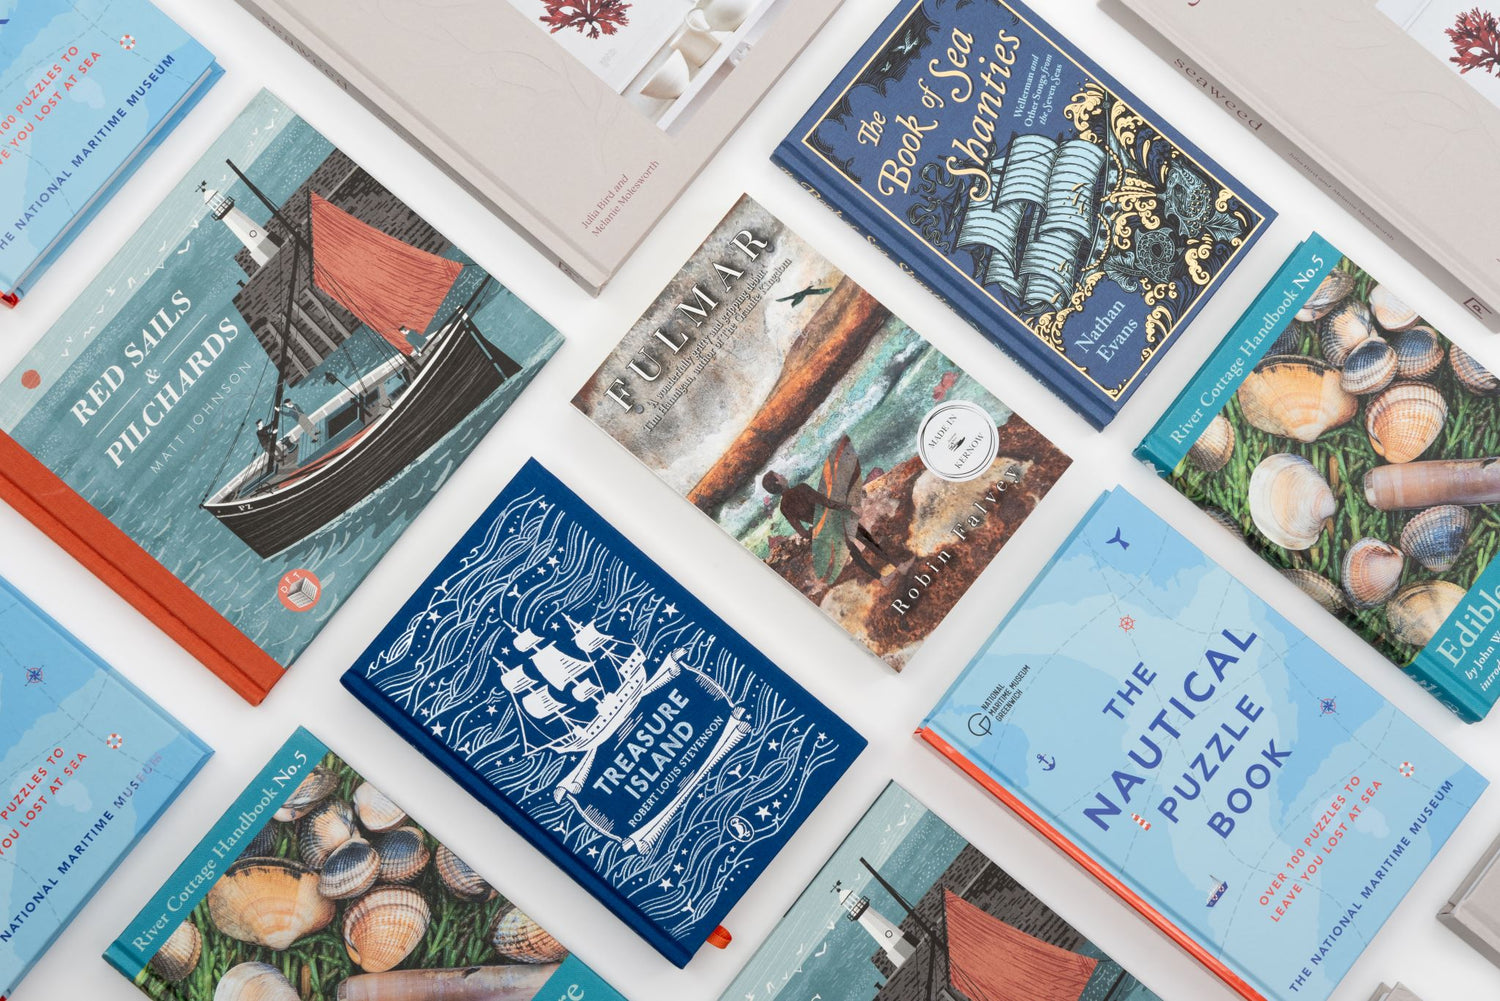 A collection of maritime-themed books arranged on a white surface. 